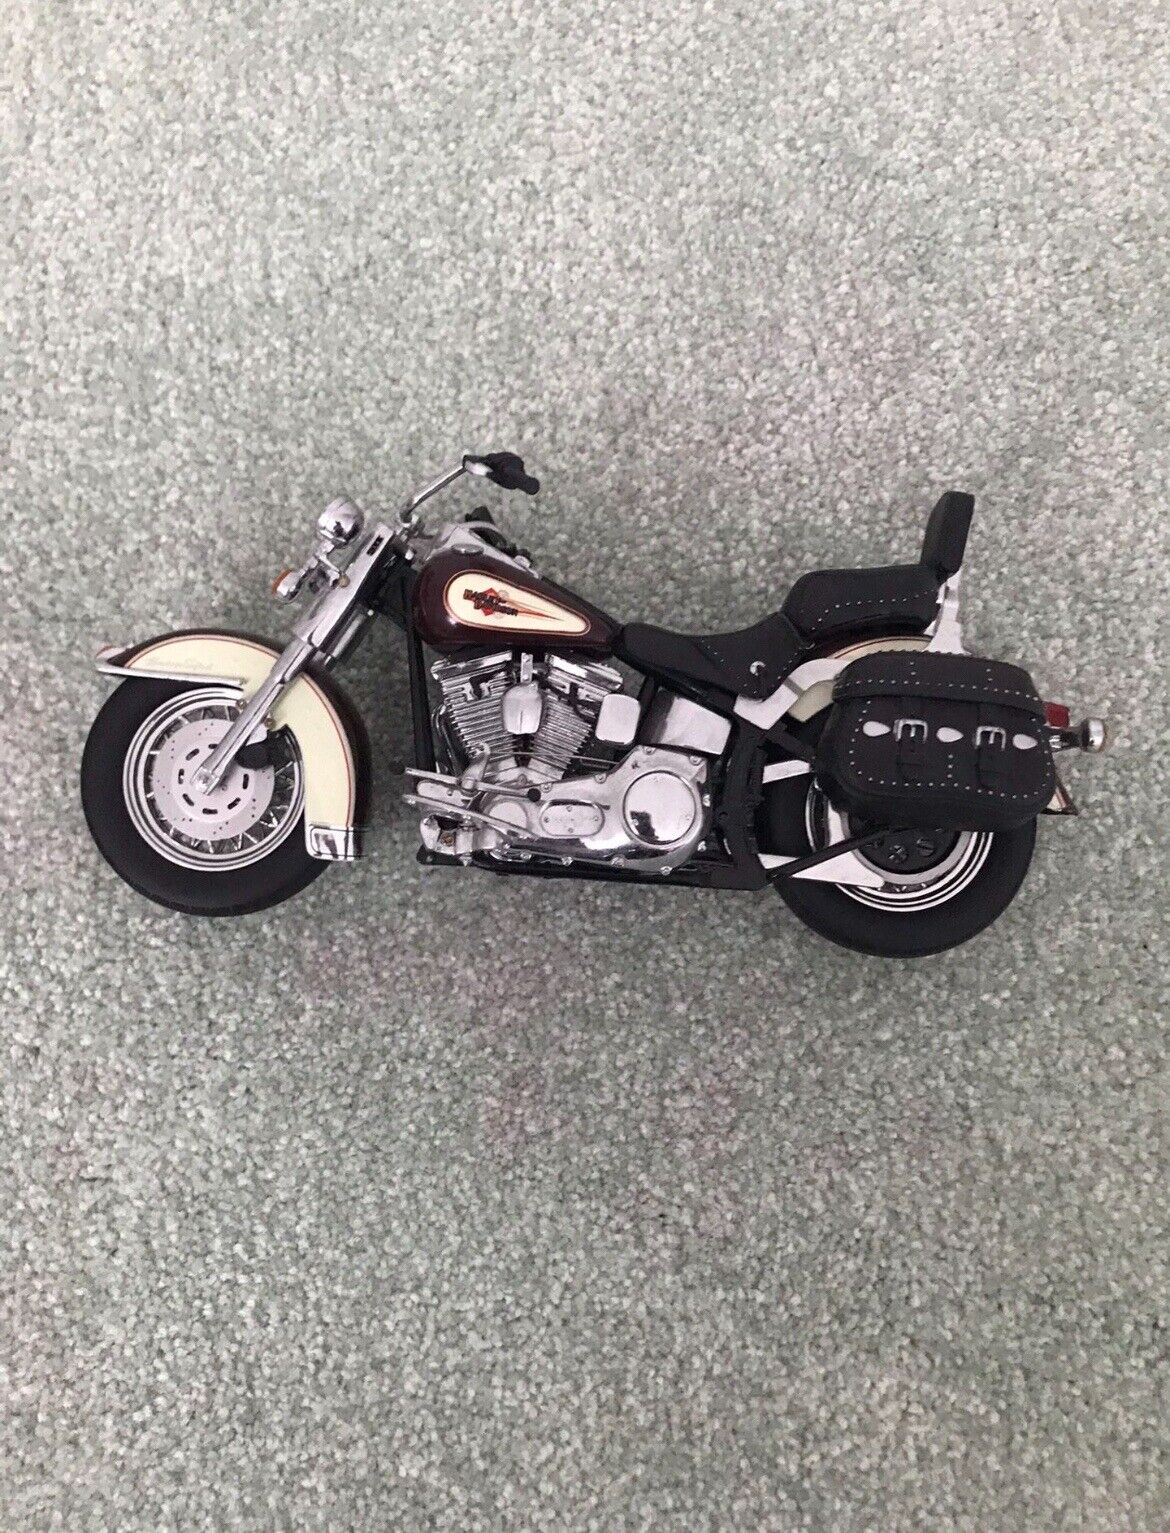 Franklin Mint Harley-Davidson Heritage Softail Classic Motorcycle (1:10 Scale)